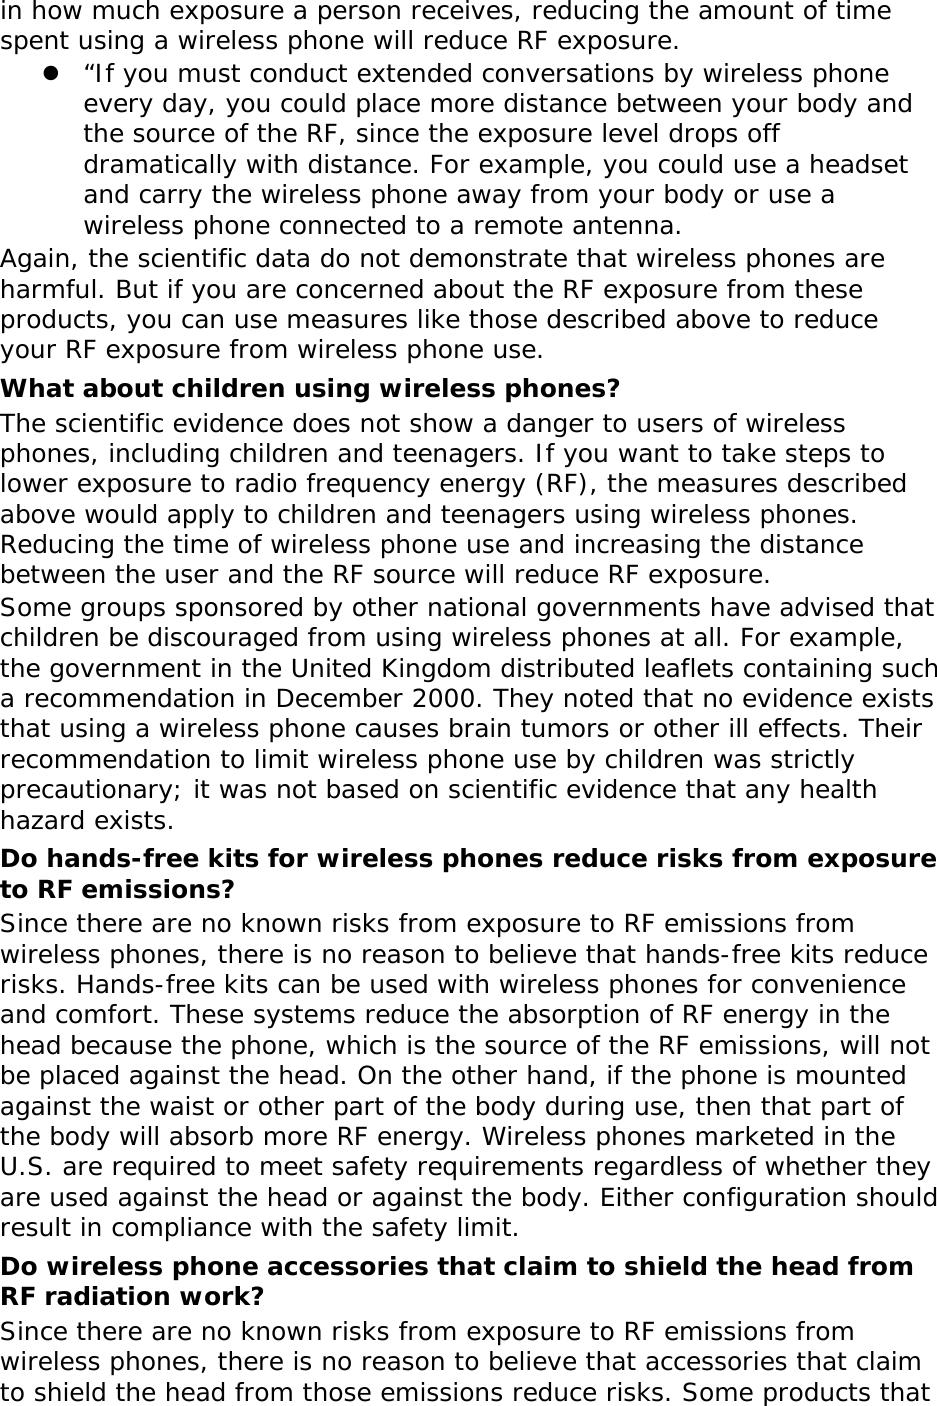 in how much exposure a person receives, reducing the amount of time spent using a wireless phone will reduce RF exposure.  “If you must conduct extended conversations by wireless phone every day, you could place more distance between your body and the source of the RF, since the exposure level drops off dramatically with distance. For example, you could use a headset and carry the wireless phone away from your body or use a wireless phone connected to a remote antenna. Again, the scientific data do not demonstrate that wireless phones are harmful. But if you are concerned about the RF exposure from these products, you can use measures like those described above to reduce your RF exposure from wireless phone use. What about children using wireless phones? The scientific evidence does not show a danger to users of wireless phones, including children and teenagers. If you want to take steps to lower exposure to radio frequency energy (RF), the measures described above would apply to children and teenagers using wireless phones. Reducing the time of wireless phone use and increasing the distance between the user and the RF source will reduce RF exposure. Some groups sponsored by other national governments have advised that children be discouraged from using wireless phones at all. For example, the government in the United Kingdom distributed leaflets containing such a recommendation in December 2000. They noted that no evidence exists that using a wireless phone causes brain tumors or other ill effects. Their recommendation to limit wireless phone use by children was strictly precautionary; it was not based on scientific evidence that any health hazard exists.  Do hands-free kits for wireless phones reduce risks from exposure to RF emissions? Since there are no known risks from exposure to RF emissions from wireless phones, there is no reason to believe that hands-free kits reduce risks. Hands-free kits can be used with wireless phones for convenience and comfort. These systems reduce the absorption of RF energy in the head because the phone, which is the source of the RF emissions, will not be placed against the head. On the other hand, if the phone is mounted against the waist or other part of the body during use, then that part of the body will absorb more RF energy. Wireless phones marketed in the U.S. are required to meet safety requirements regardless of whether they are used against the head or against the body. Either configuration should result in compliance with the safety limit. Do wireless phone accessories that claim to shield the head from RF radiation work? Since there are no known risks from exposure to RF emissions from wireless phones, there is no reason to believe that accessories that claim to shield the head from those emissions reduce risks. Some products that 